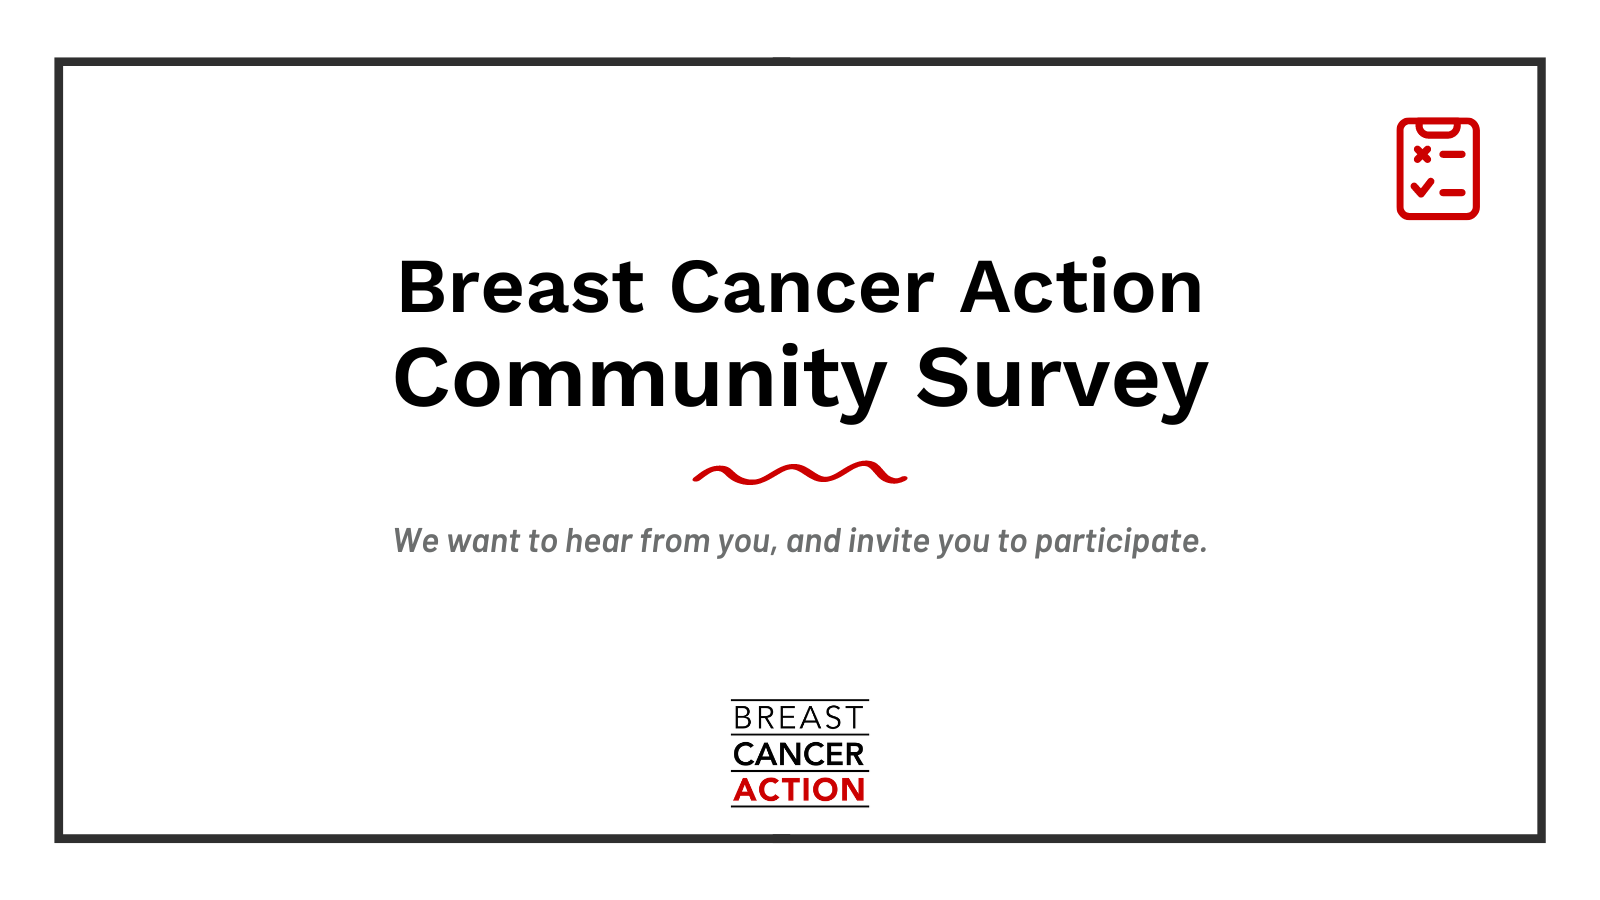 Breast Cancer Action Community Survey